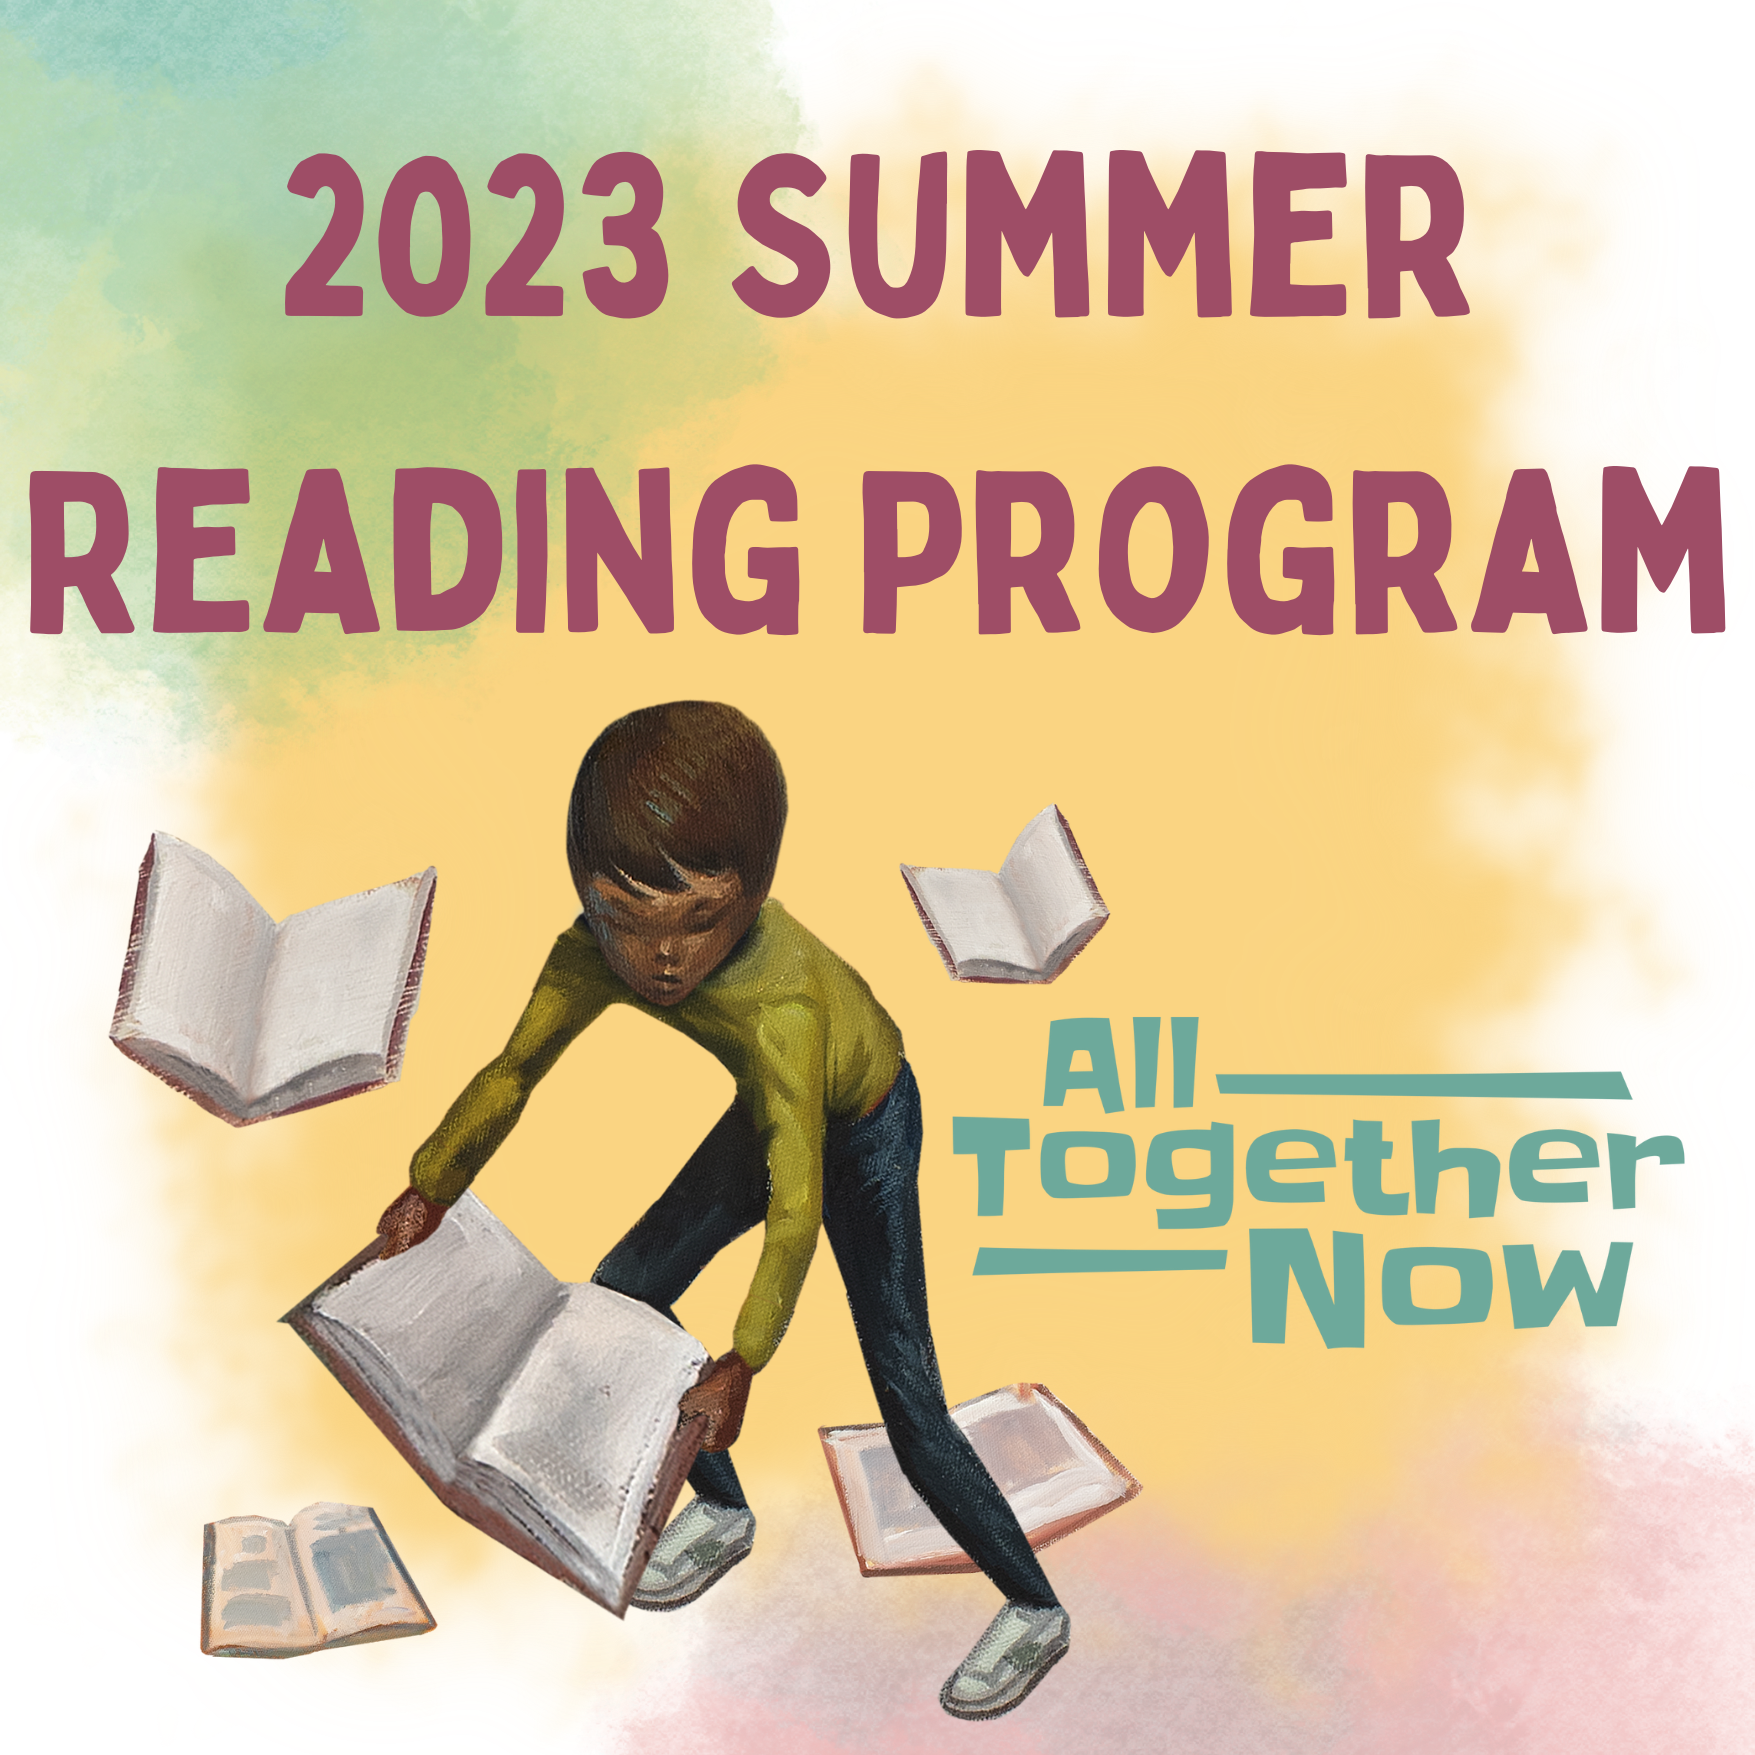 Beaver Creek Library - All Together Now Youth Summer Reading Program 2023